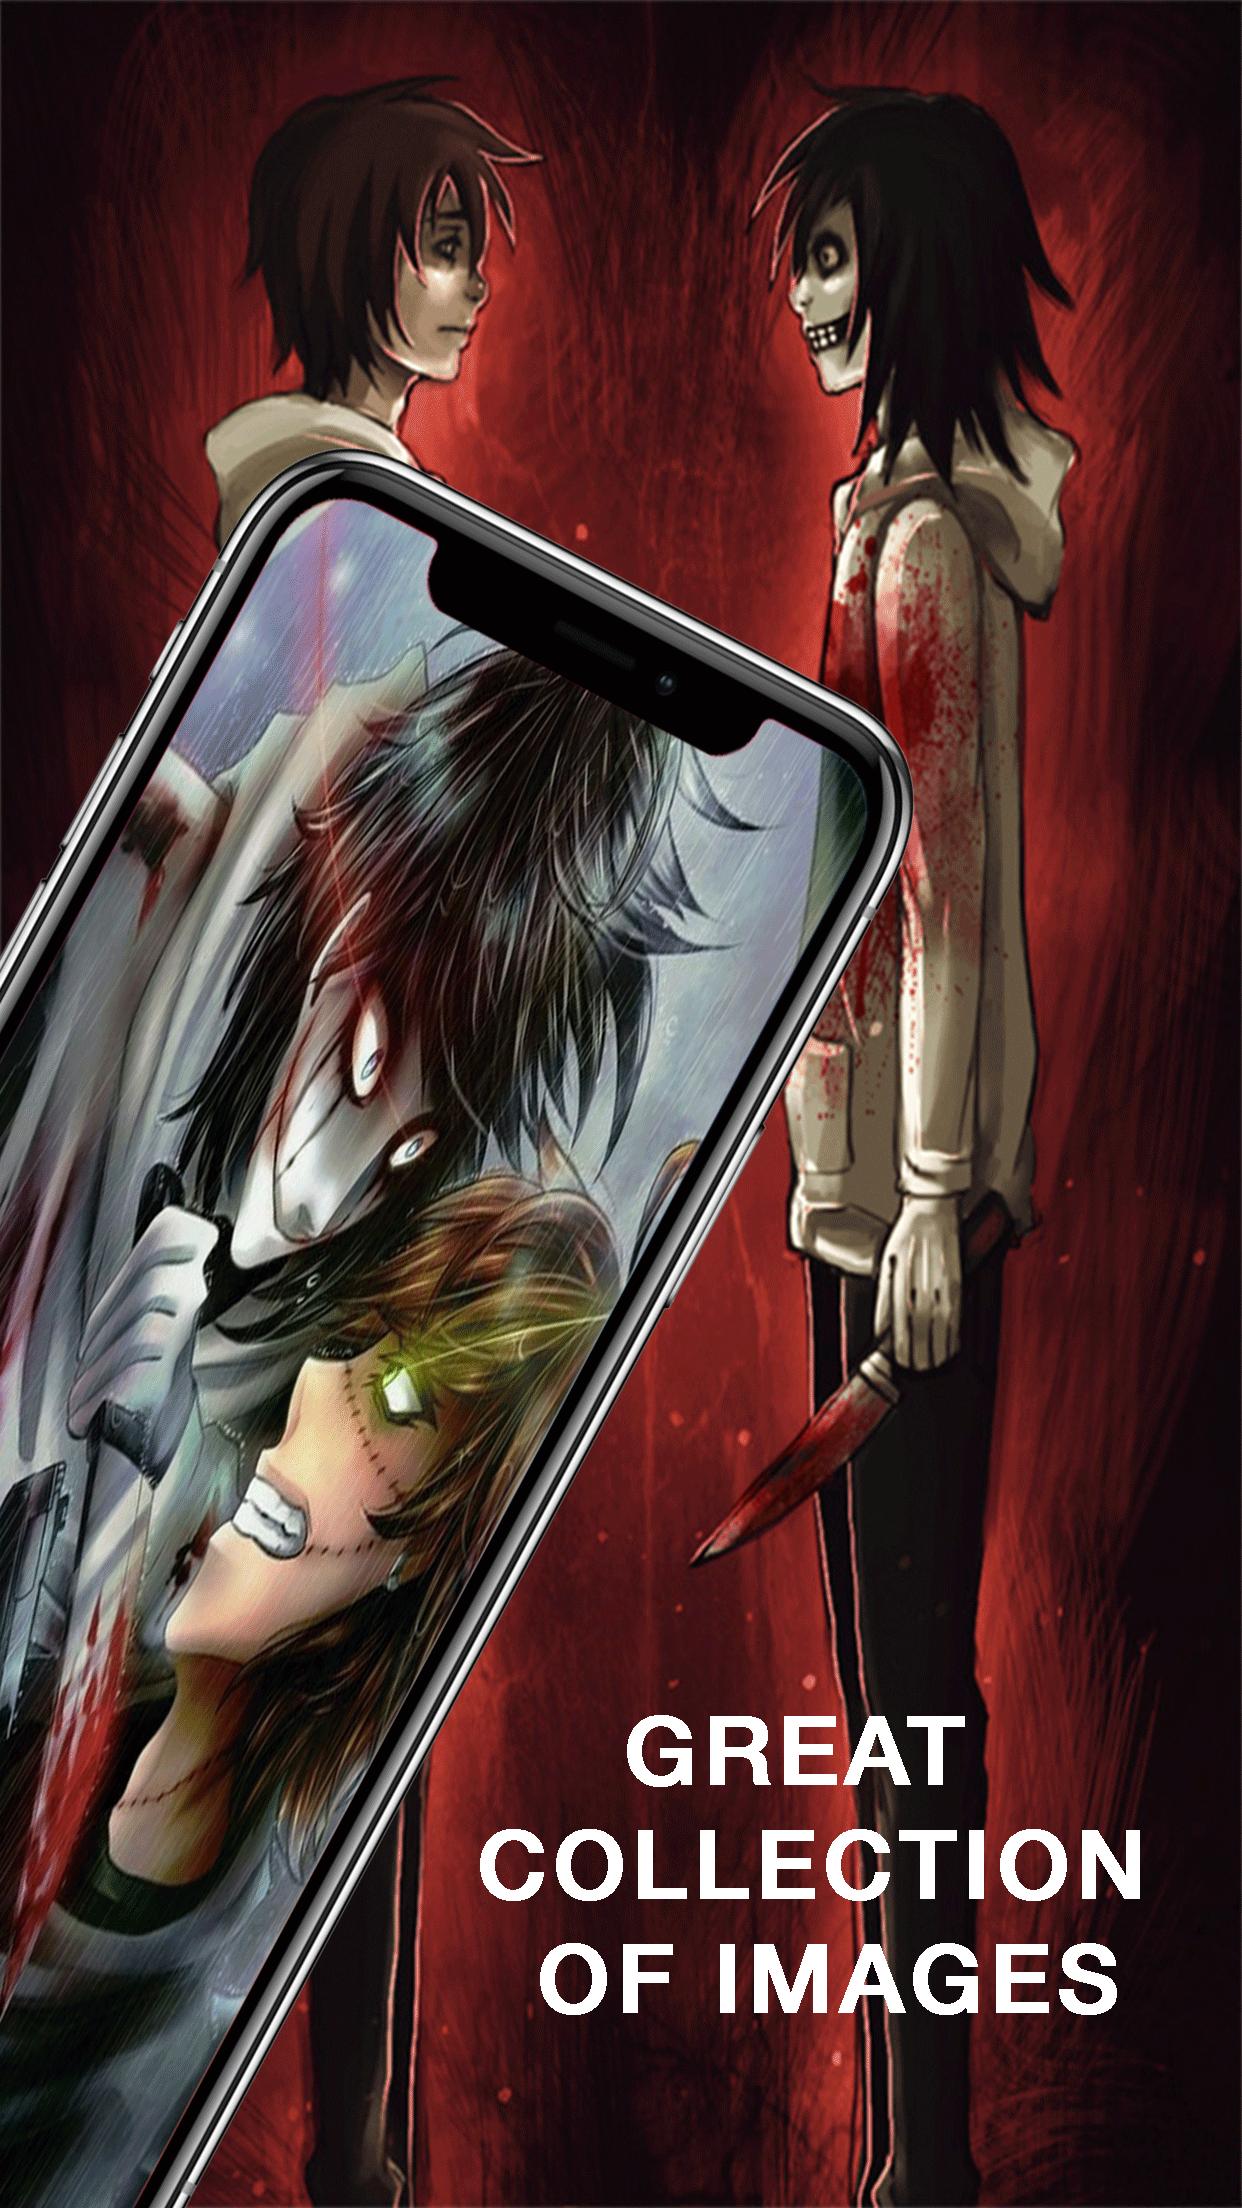 Jeff Wallpapers Creepypasta The Killer anime for Android - APK Download